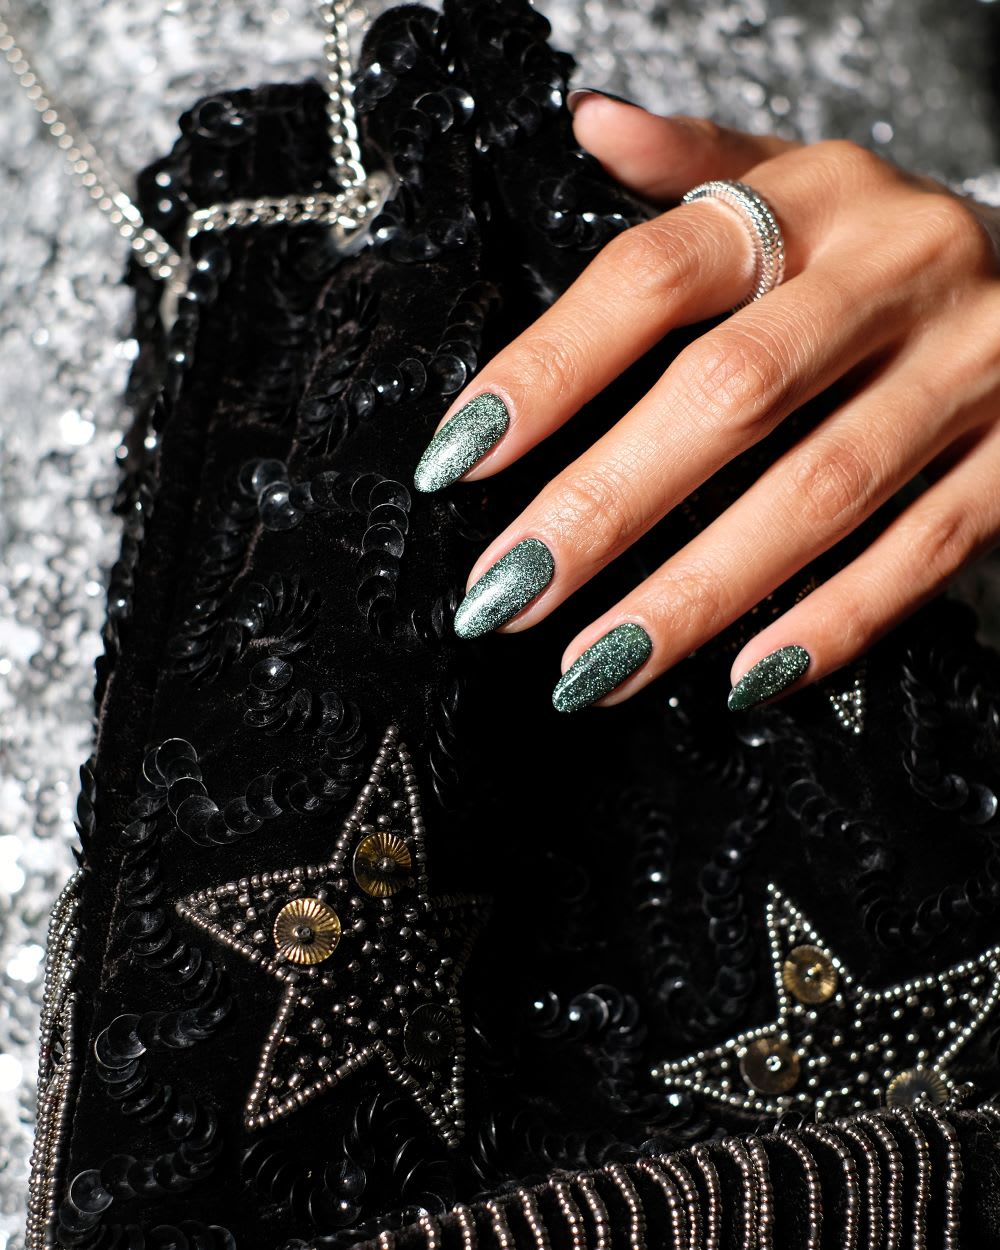 Are you warming up to the velvet nails trend, yet? - Times of India